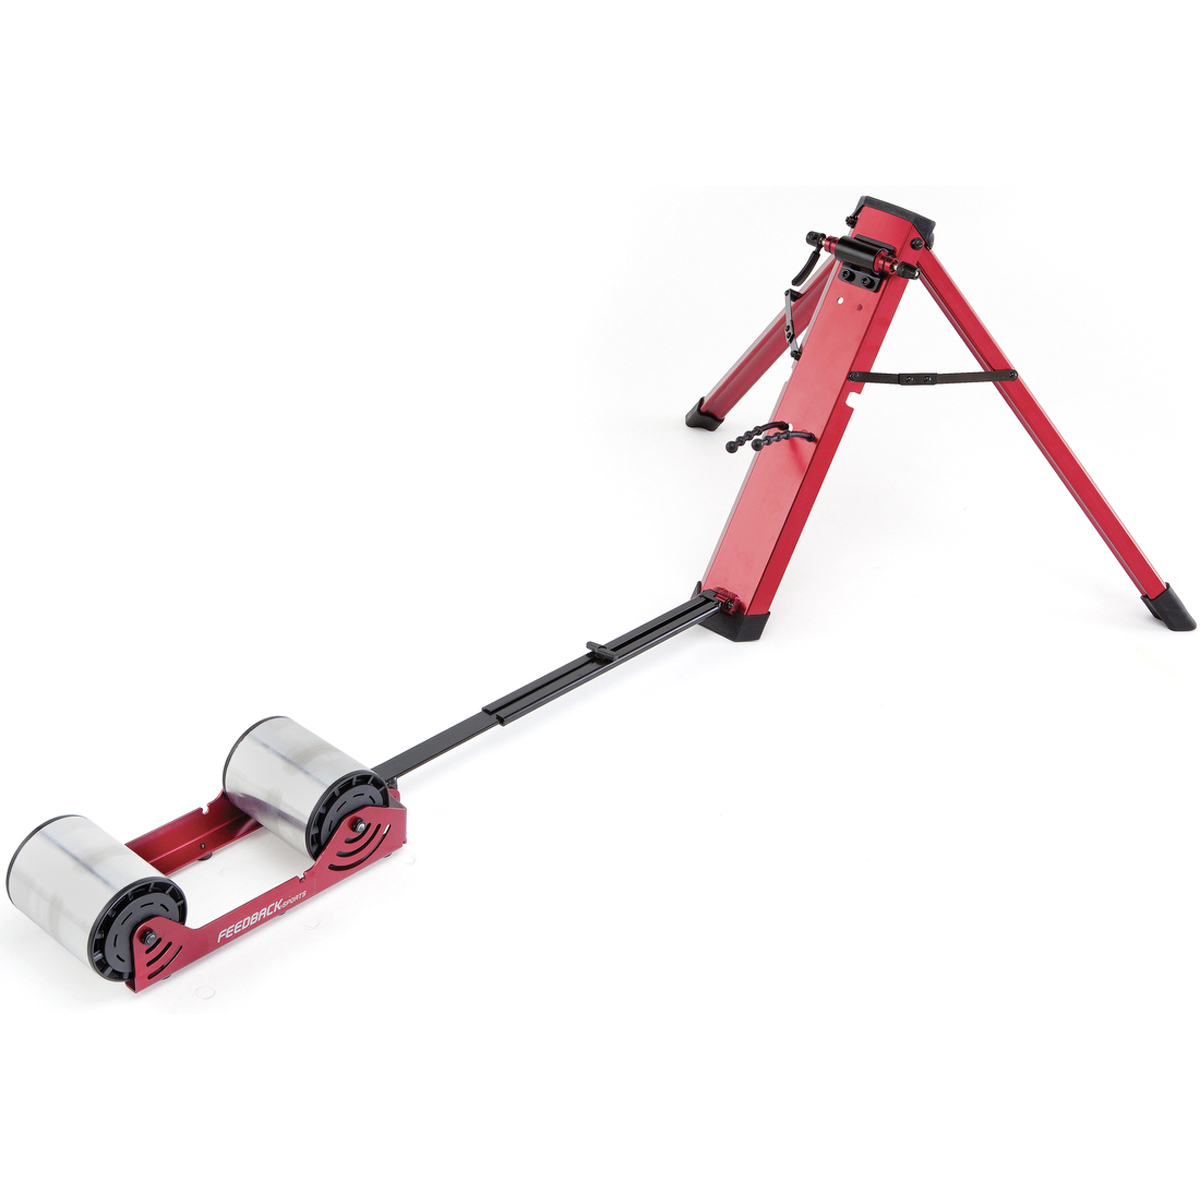 Picture of Feedback Sports Omnium - Over-Drive Bike Roller - red